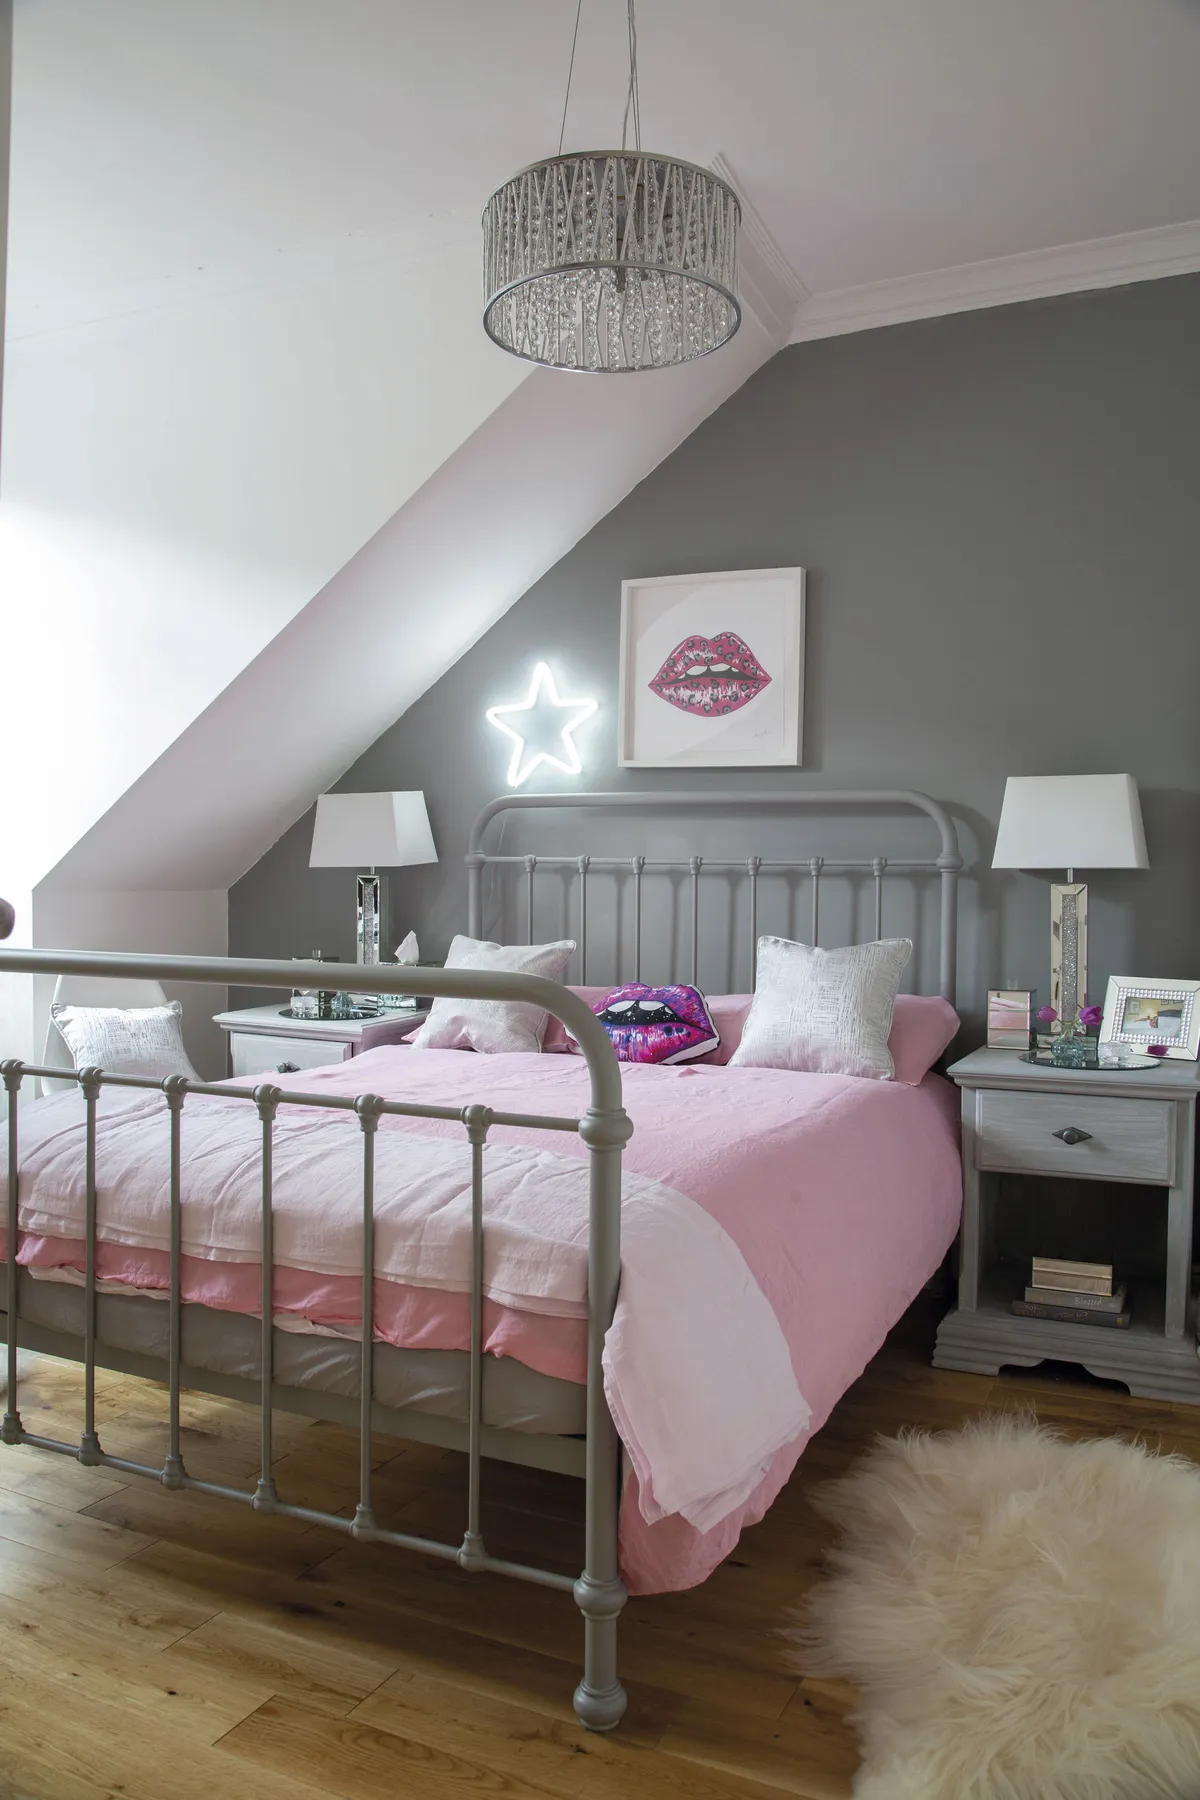 ‘The bed frame is from Feather & Black and I bought the bedside cabinets from a local charity shop before painting them the same shade as the wall,’ Lesley says